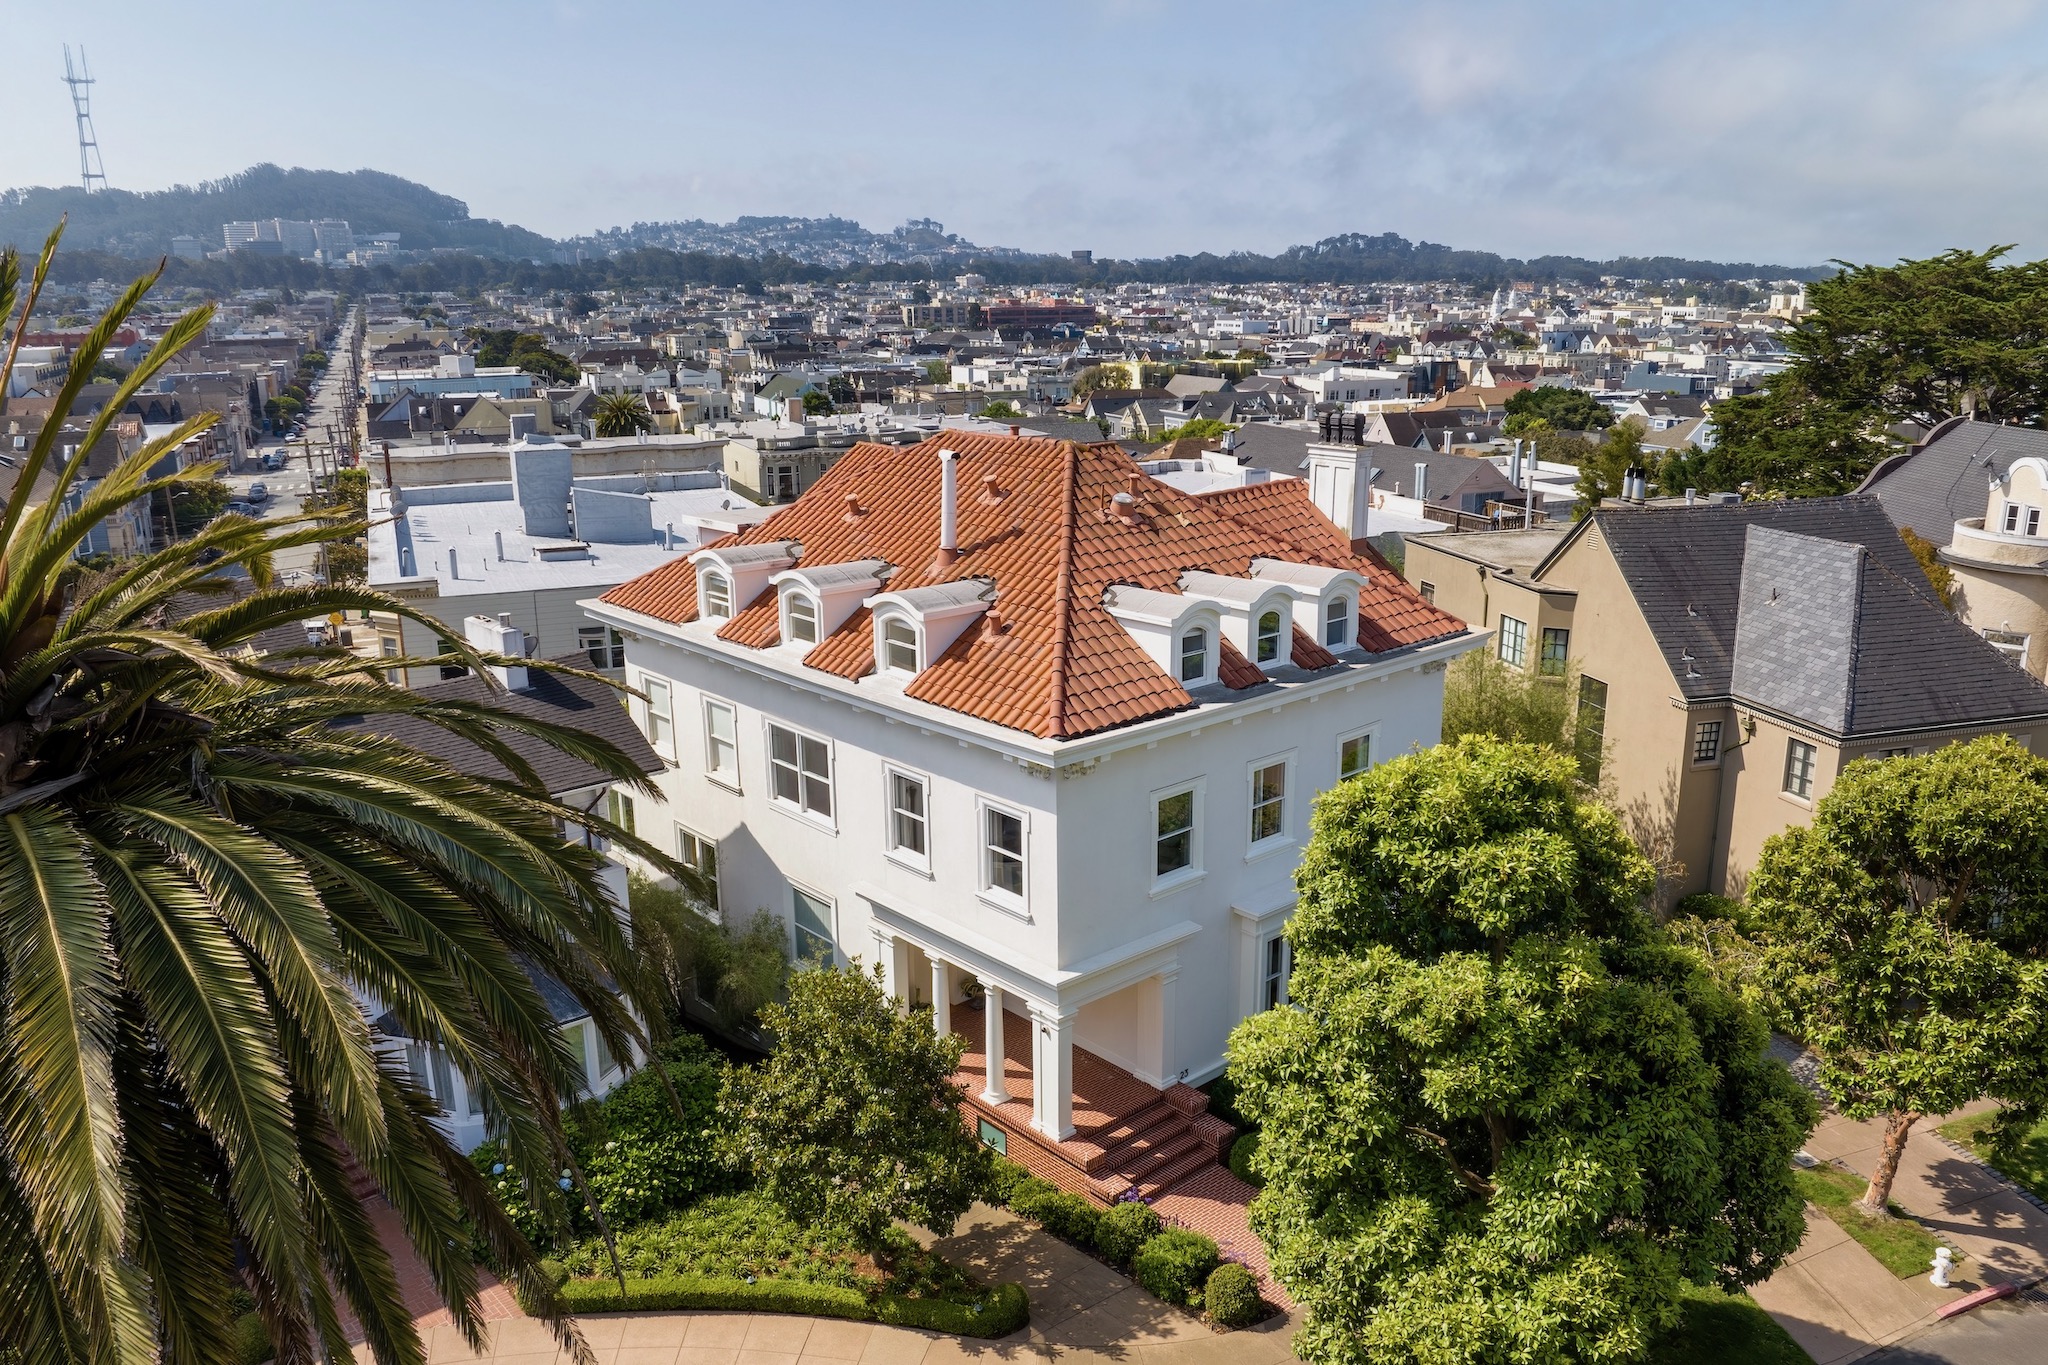 Mansion for sale on San Francisco’s exclusive Presidio Terrace